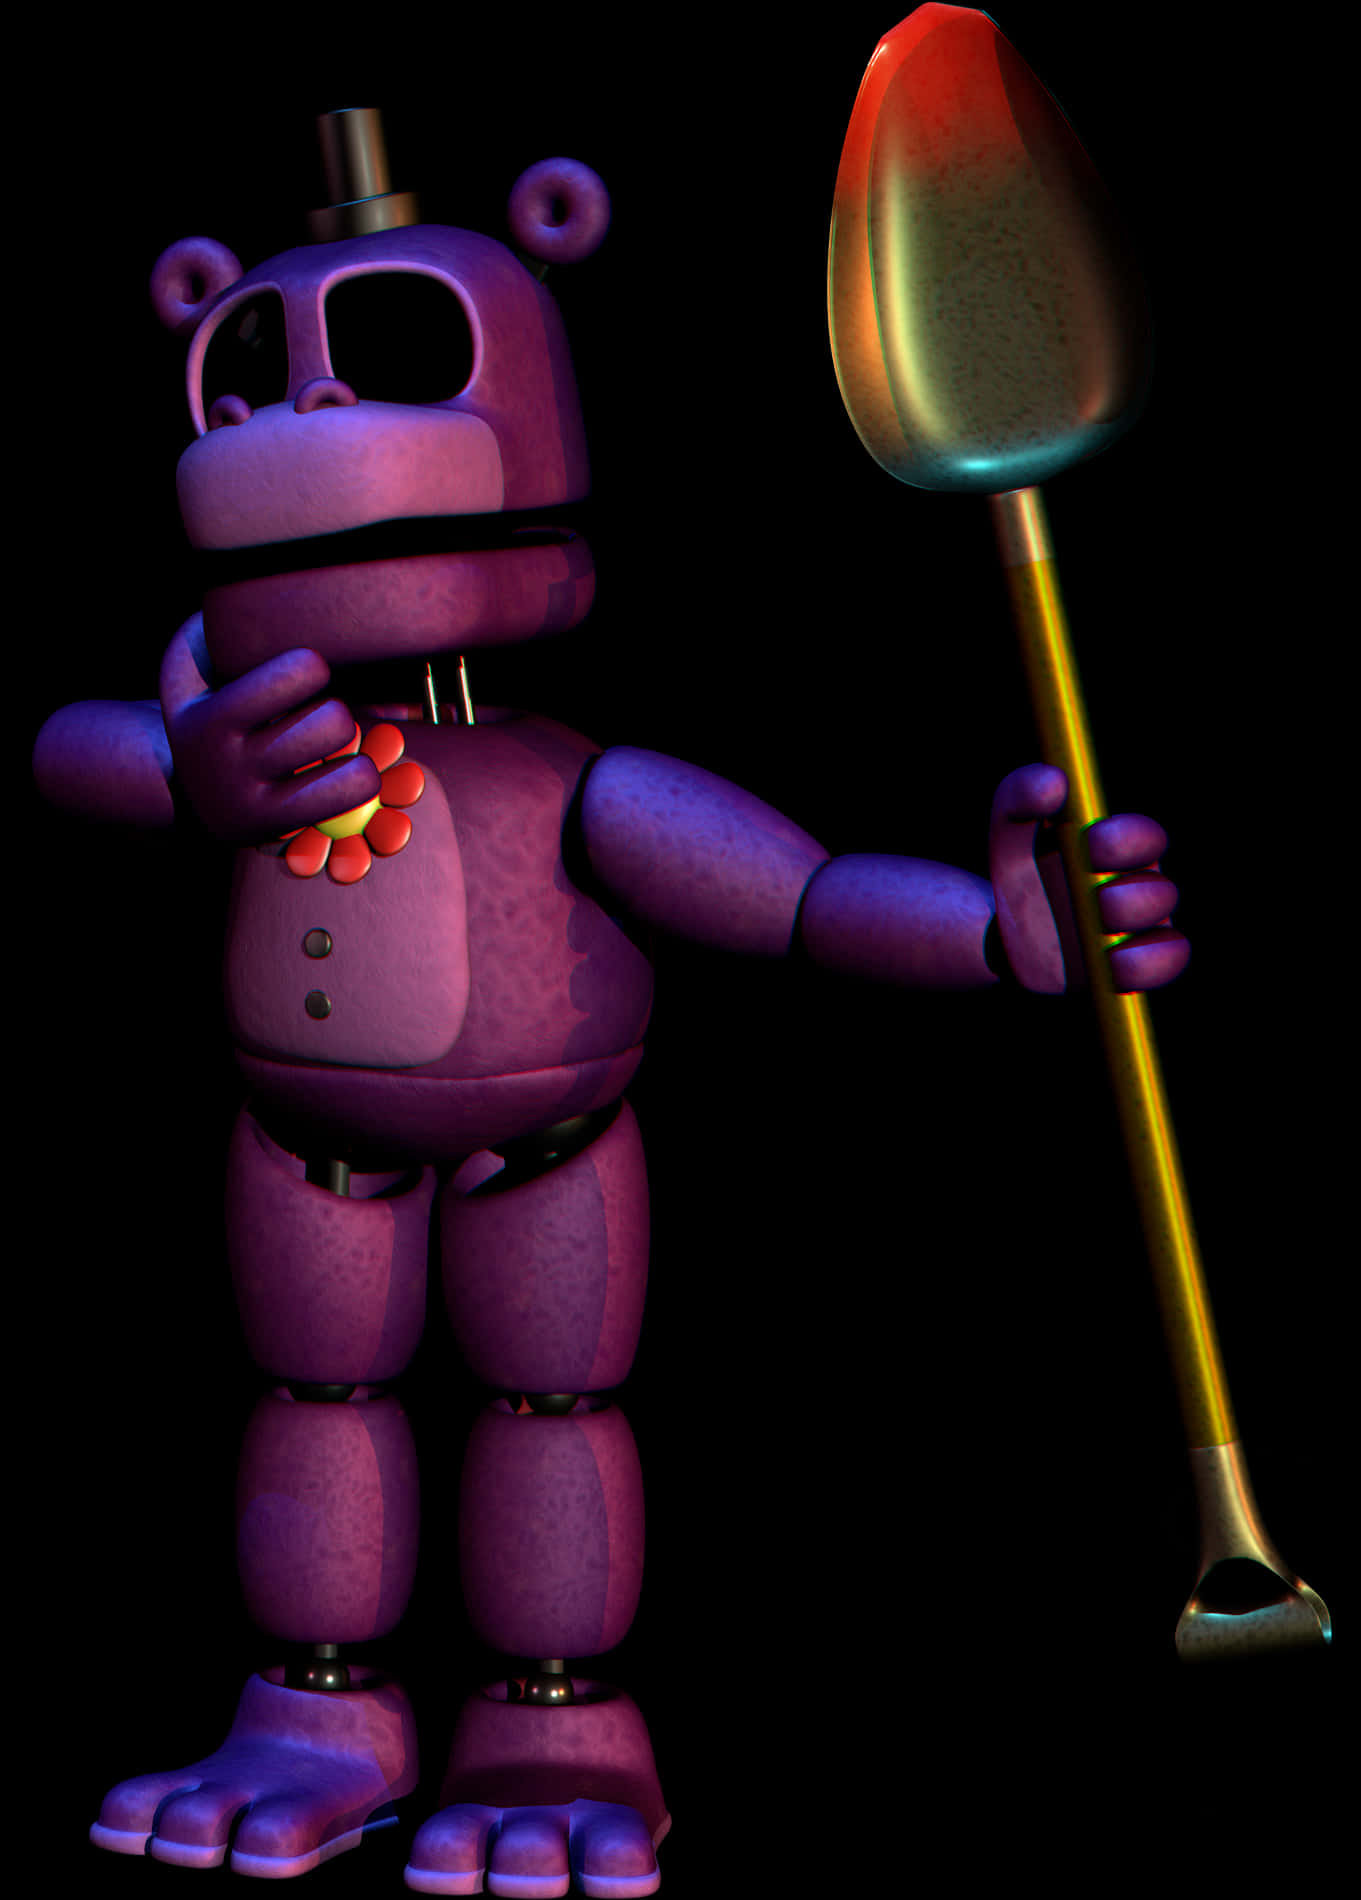 A Purple Toy Character Holding A Golden Spoon